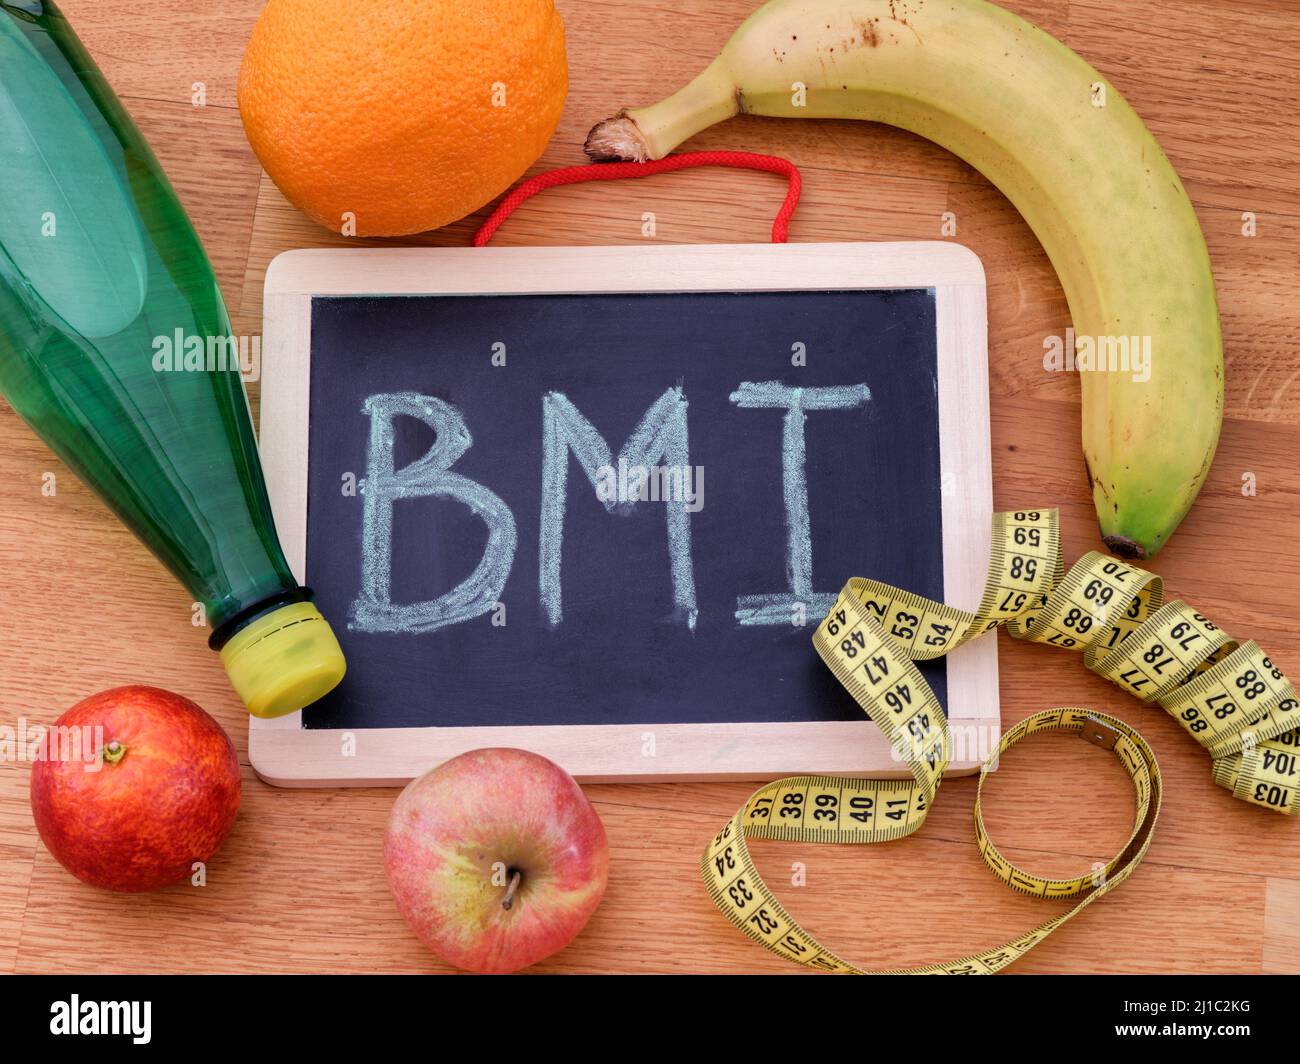 https://c8.alamy.com/comp/2J1C2KG/the-abbreviation-bmi-body-mass-index-on-a-chalkboard-and-some-fruits-a-water-bottle-and-measuring-tape-around-it-close-up-2J1C2KG.jpg